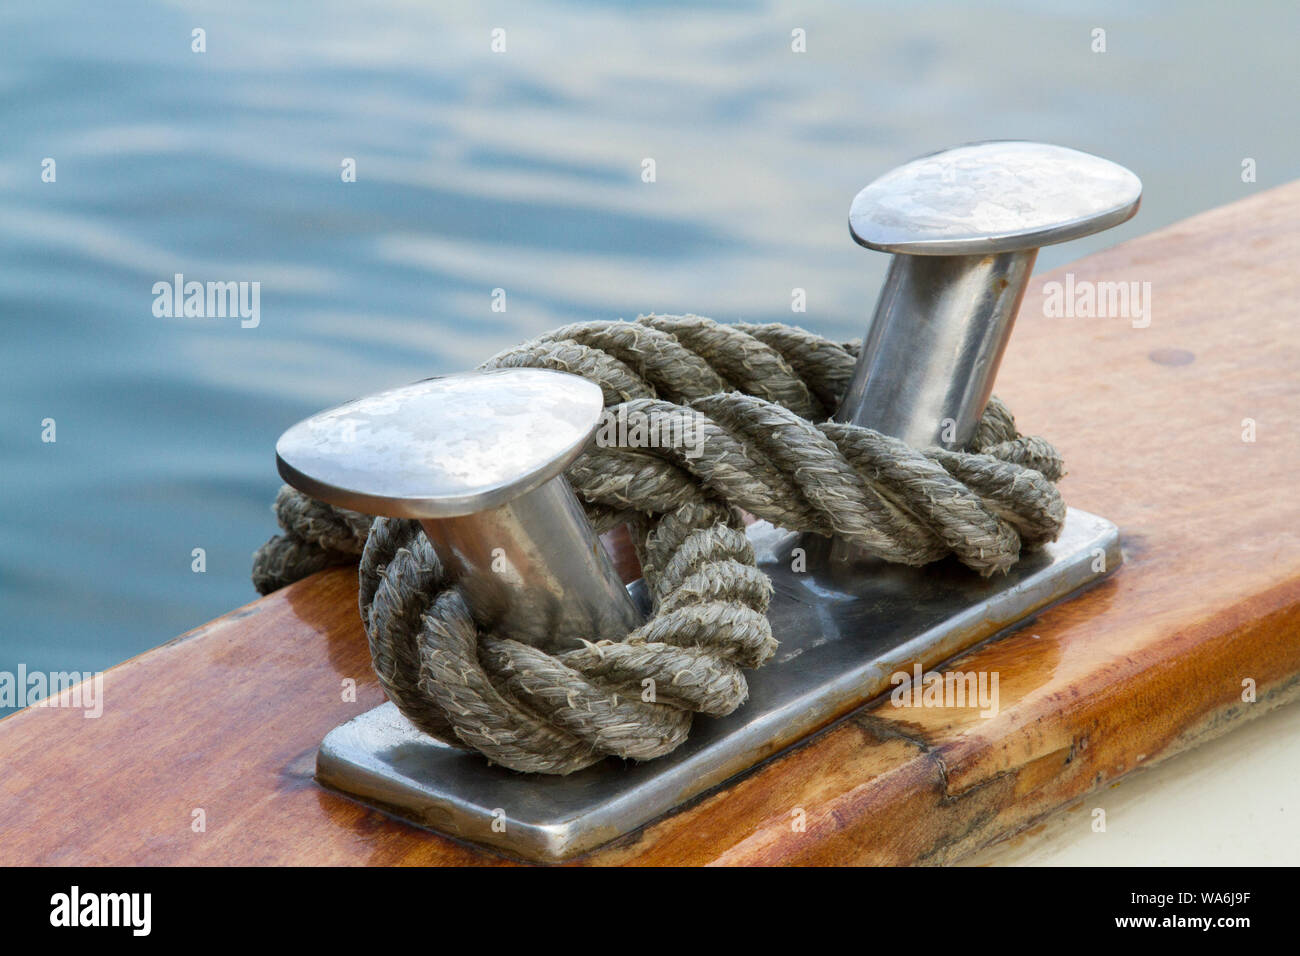 A mooring cleat on a boat, with copy space Stock Photo